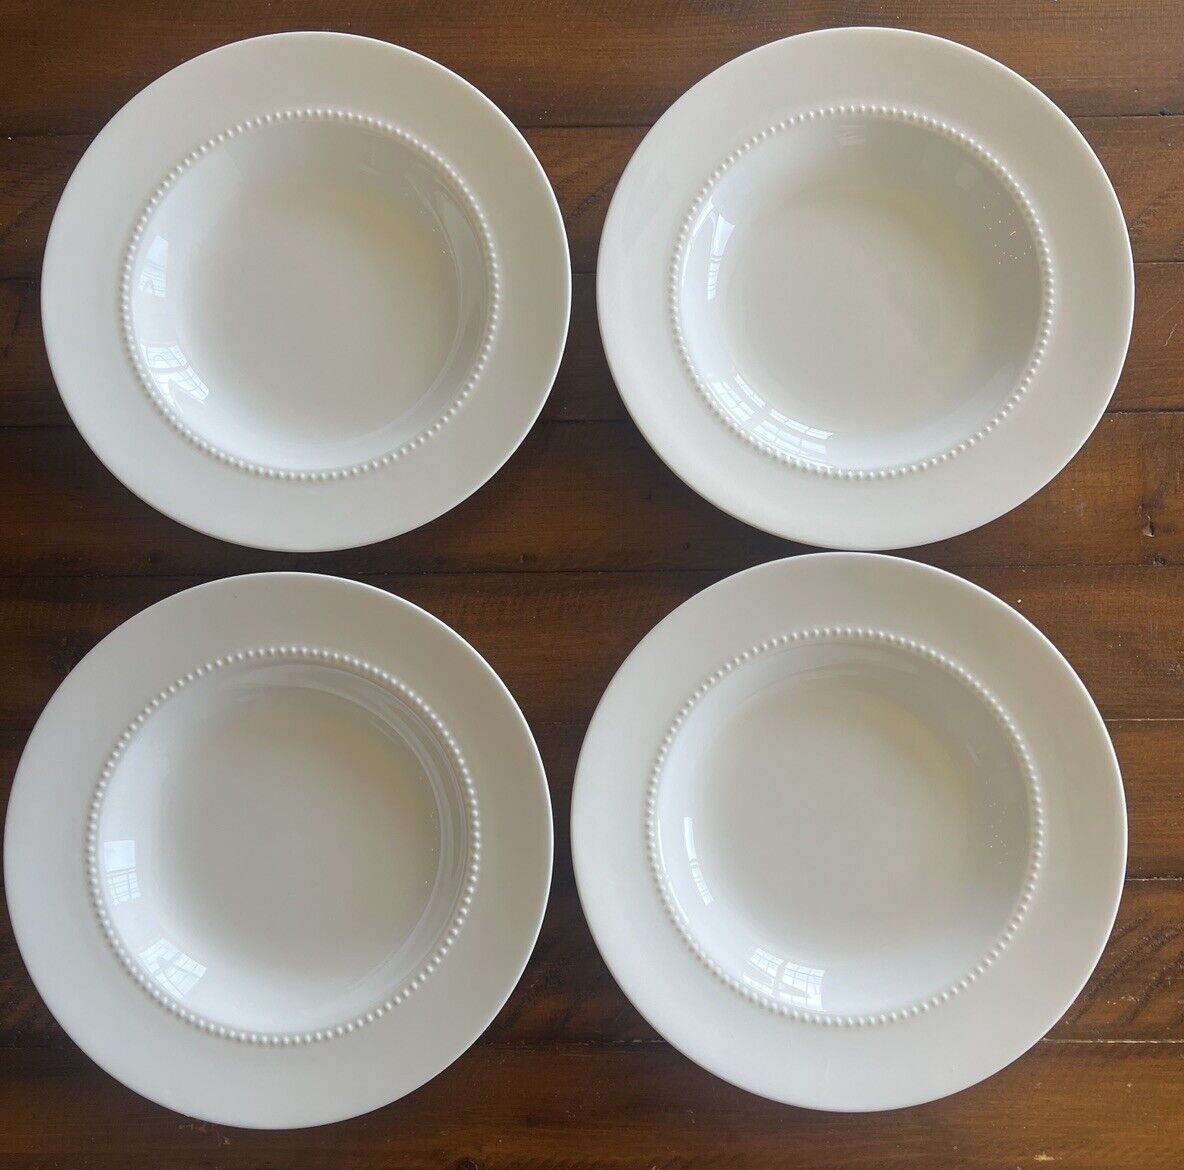 Crate & Barrel White Pearl 9.5” Rimmed Soup Bowls Bone China by Nikko Set of 4